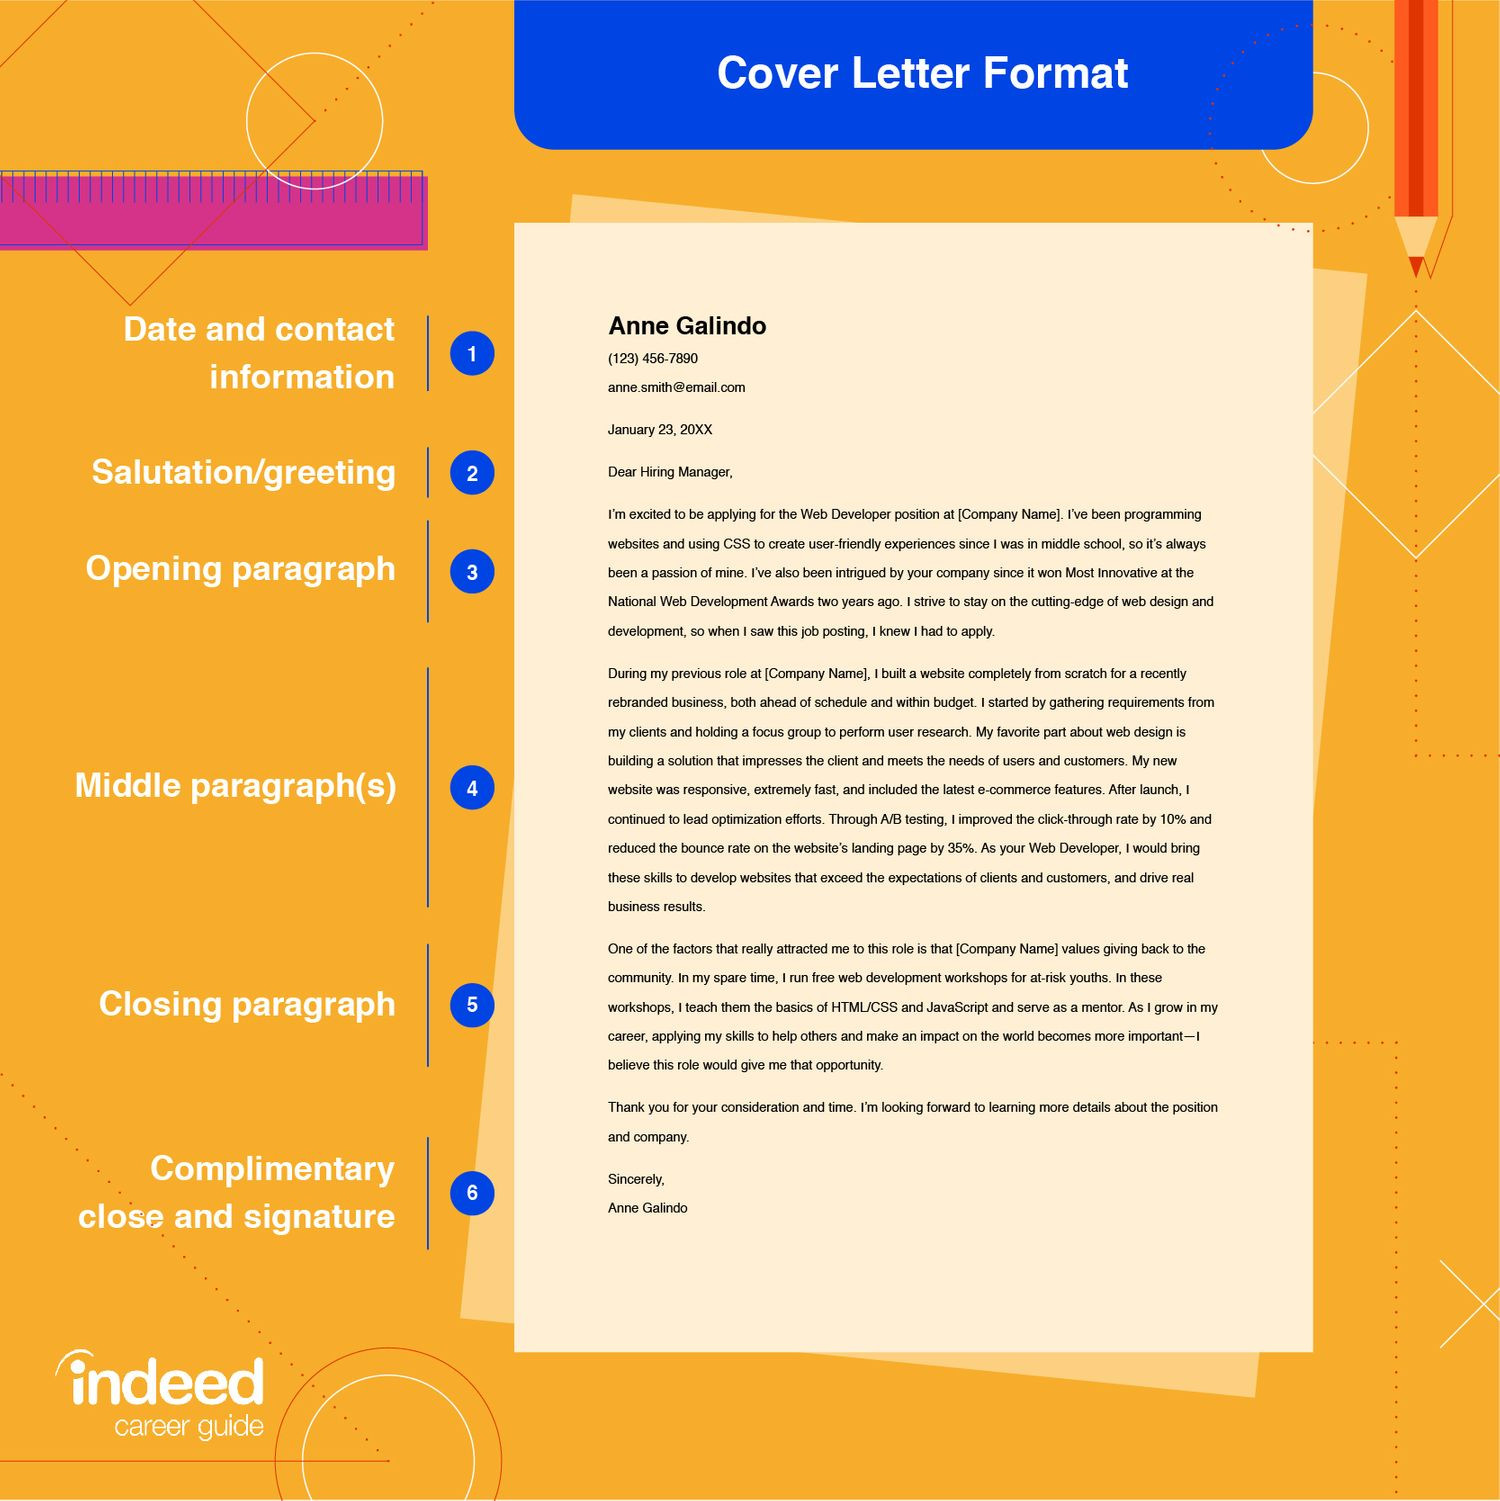 Email Cover Letter Resume attached Sample How to Send An Email Cover Letter (with Example) Indeed.com